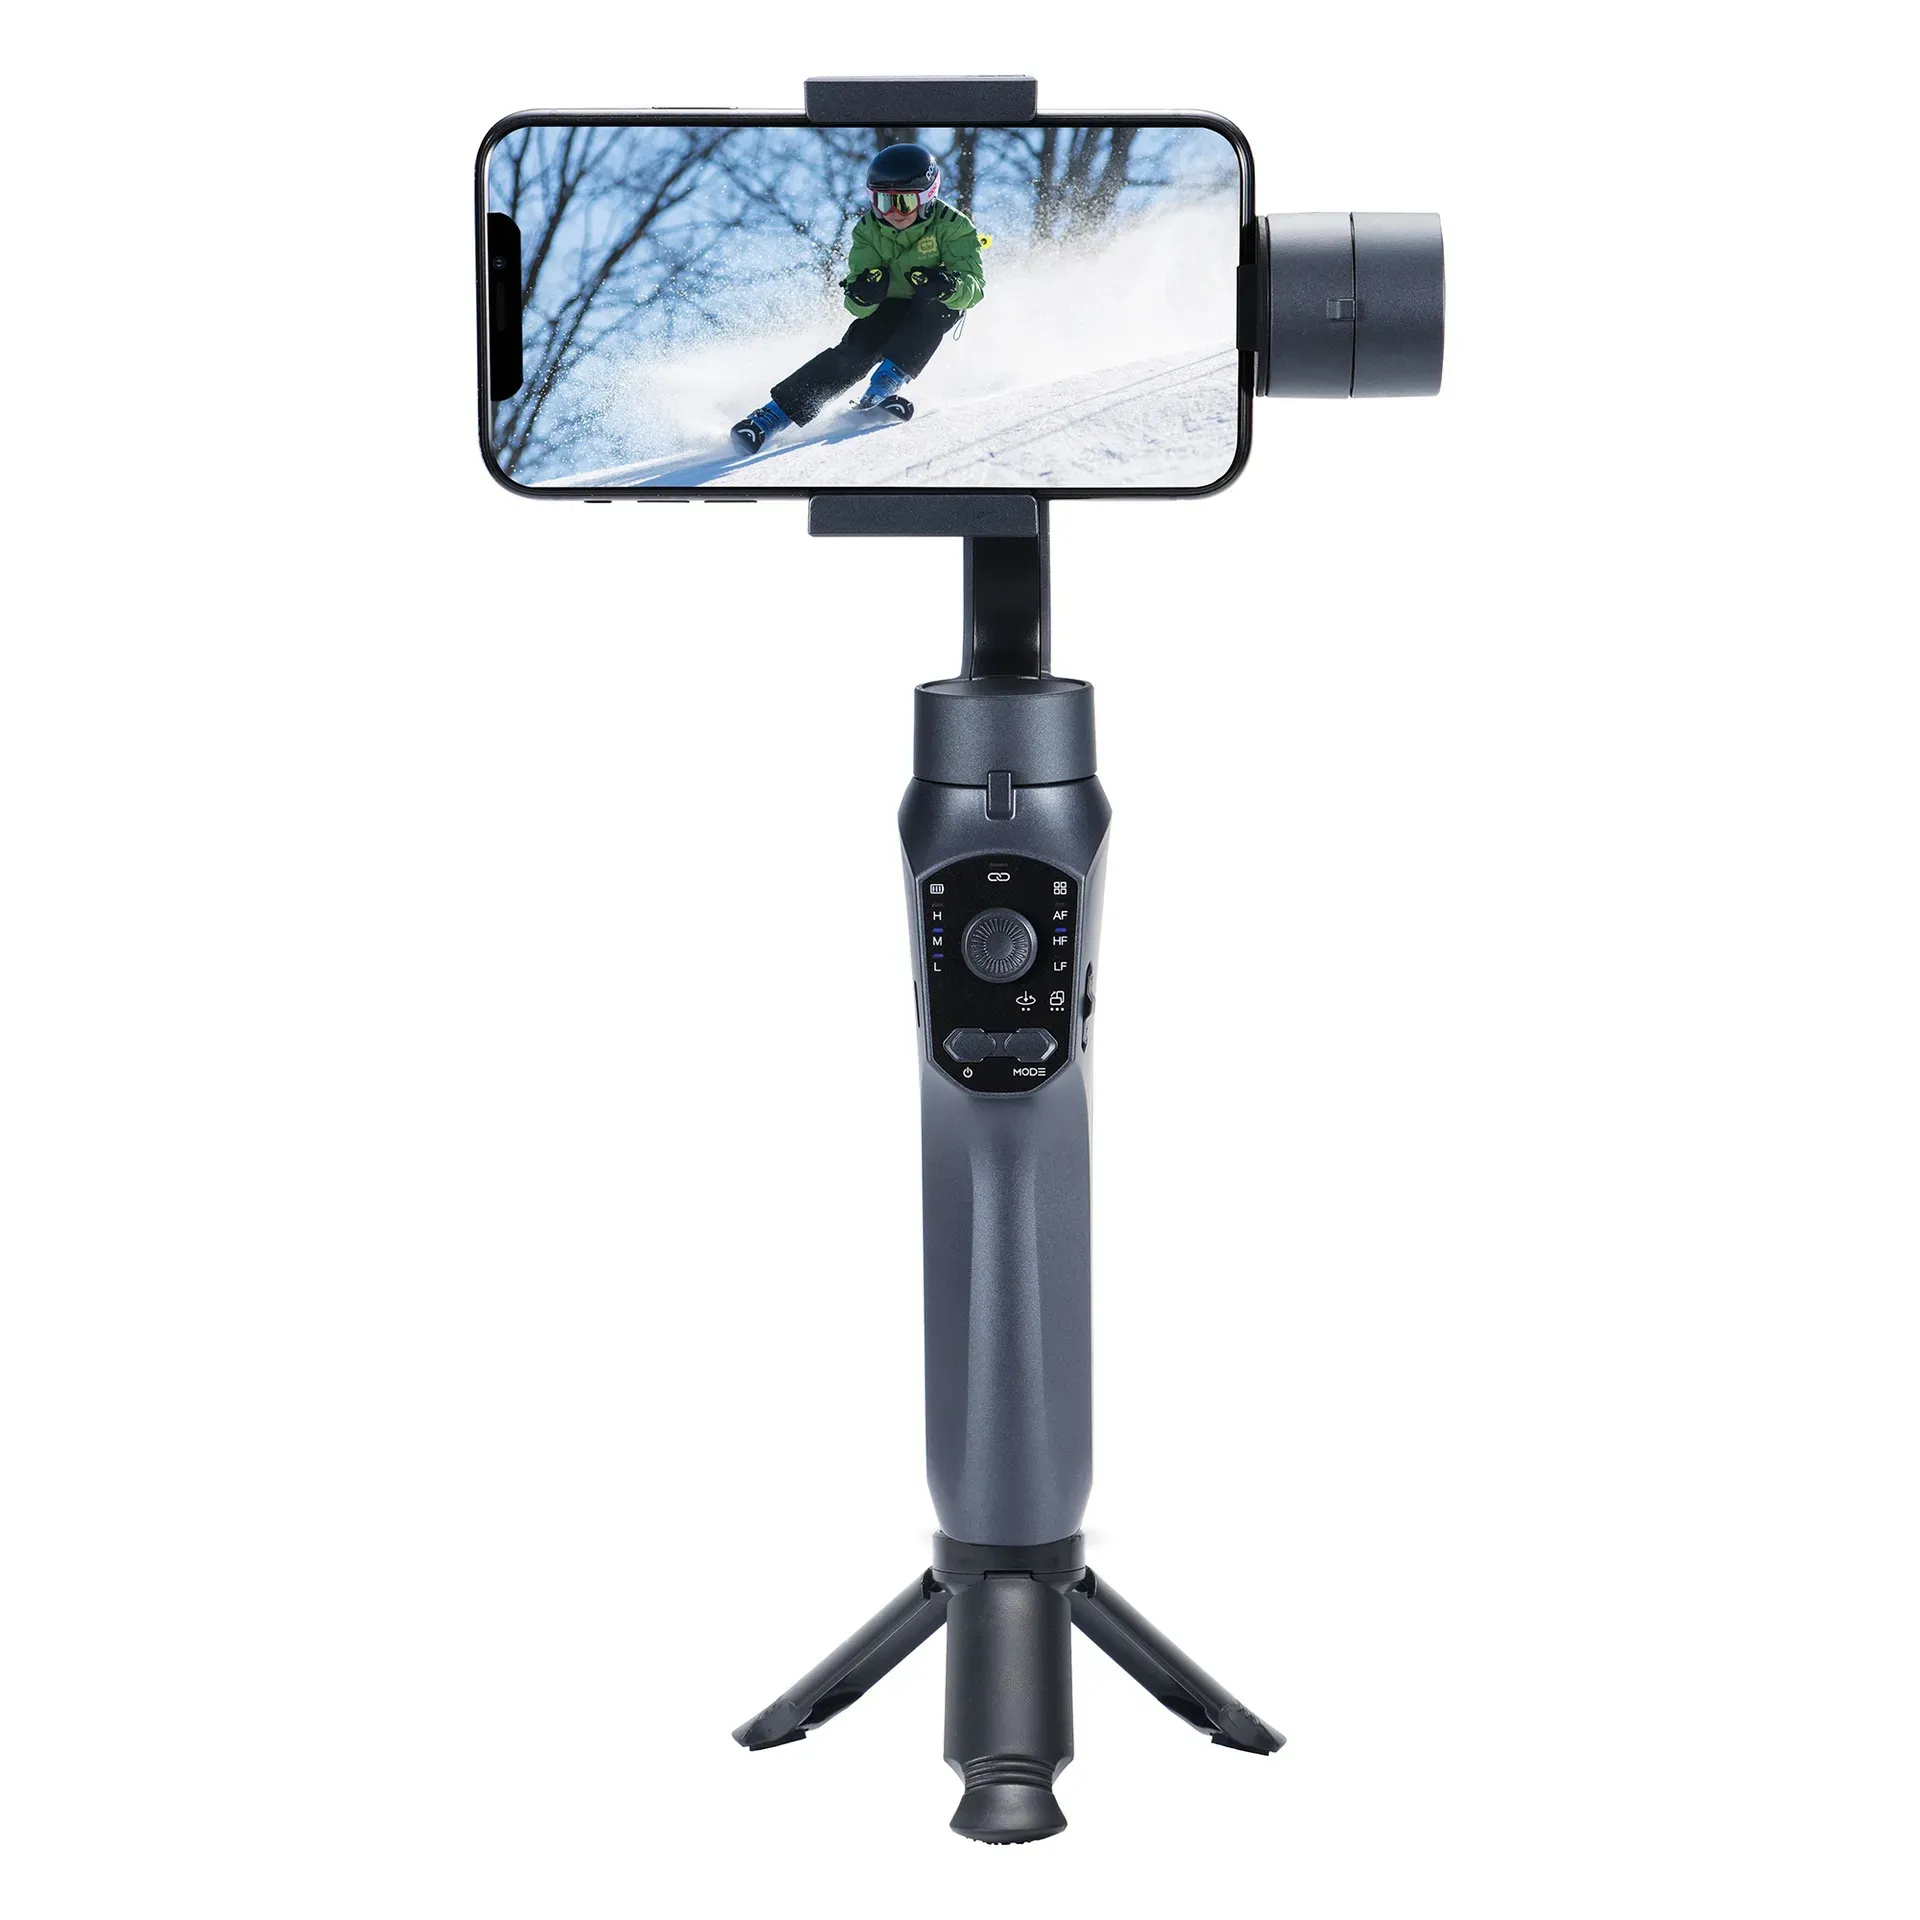 AXNEN S5B 3 Axis Handheld gimbal stabilizer cellphone Video Record  Smartphone Gimbal For phone Action Camera